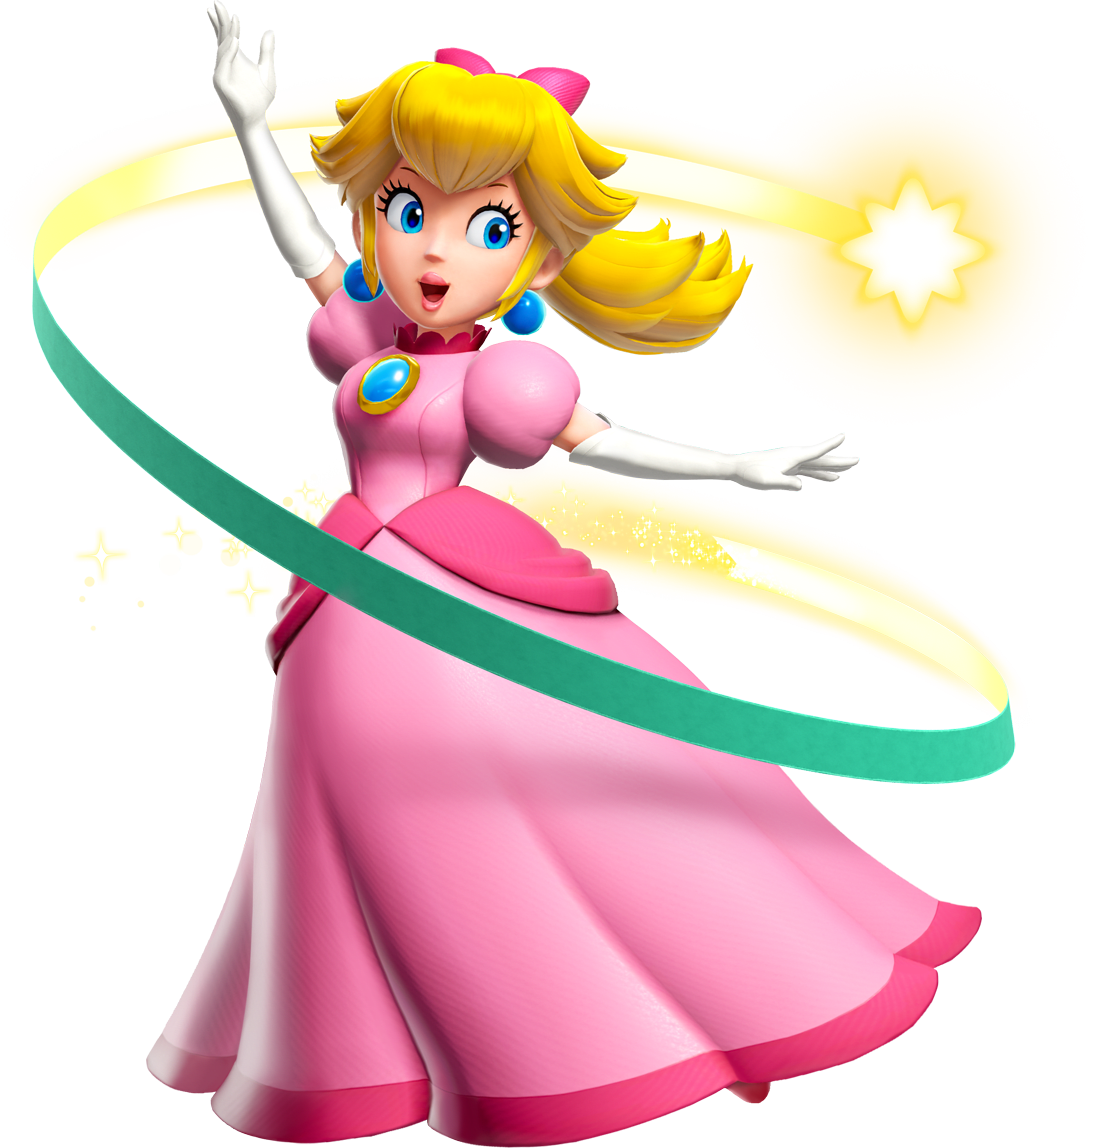 Peach poses in her pink dress. A glowing ribbon spirals around her, preparing for a transformation.